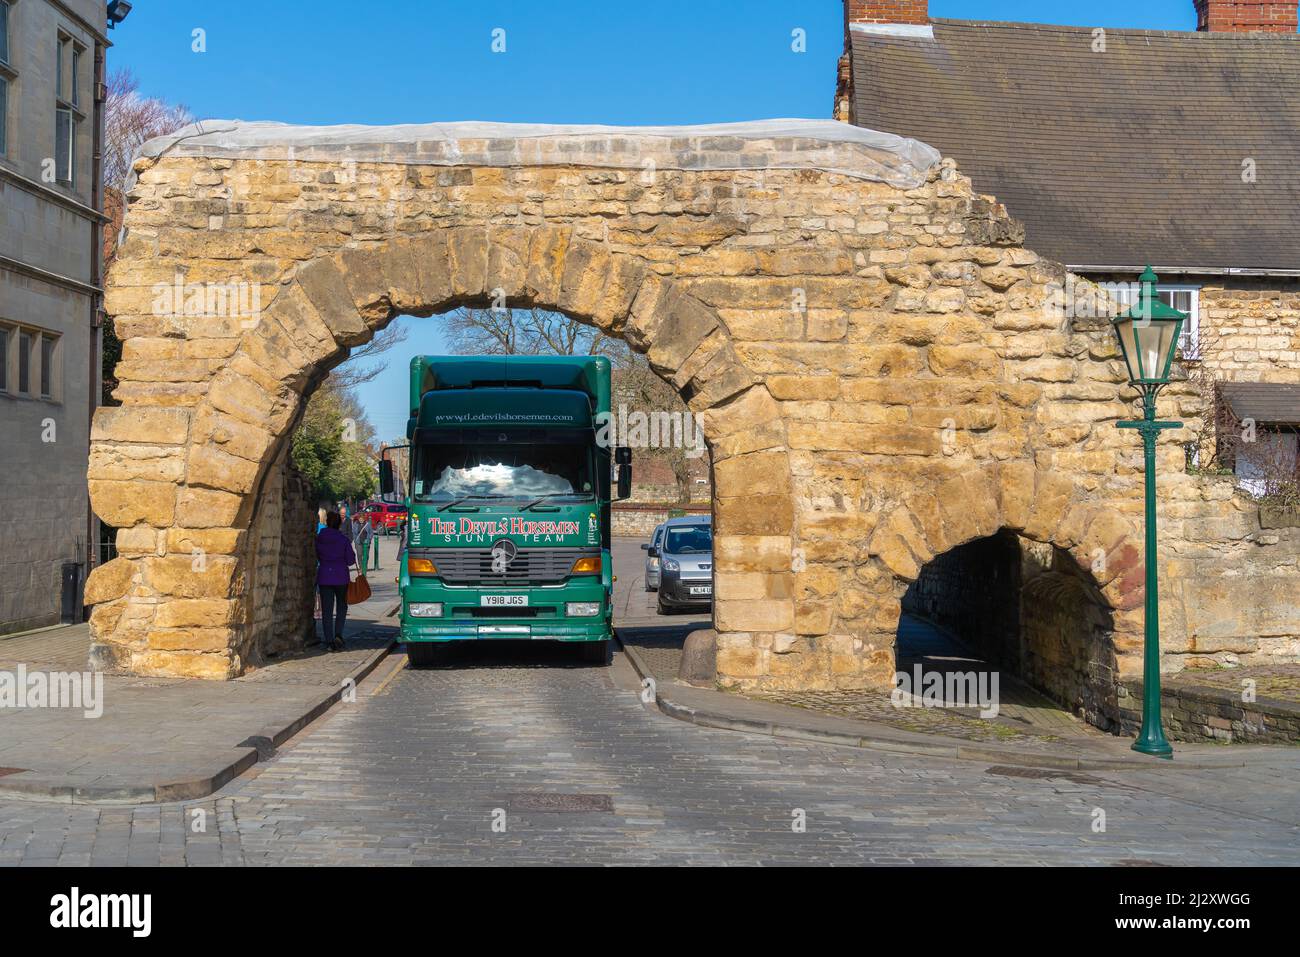 Newport Arch, Lincoln, Roman Sites, most famous, Roman remain Lincoln, best preserved, daily use, through traffic, only roman arch traffic use today. Stock Photo